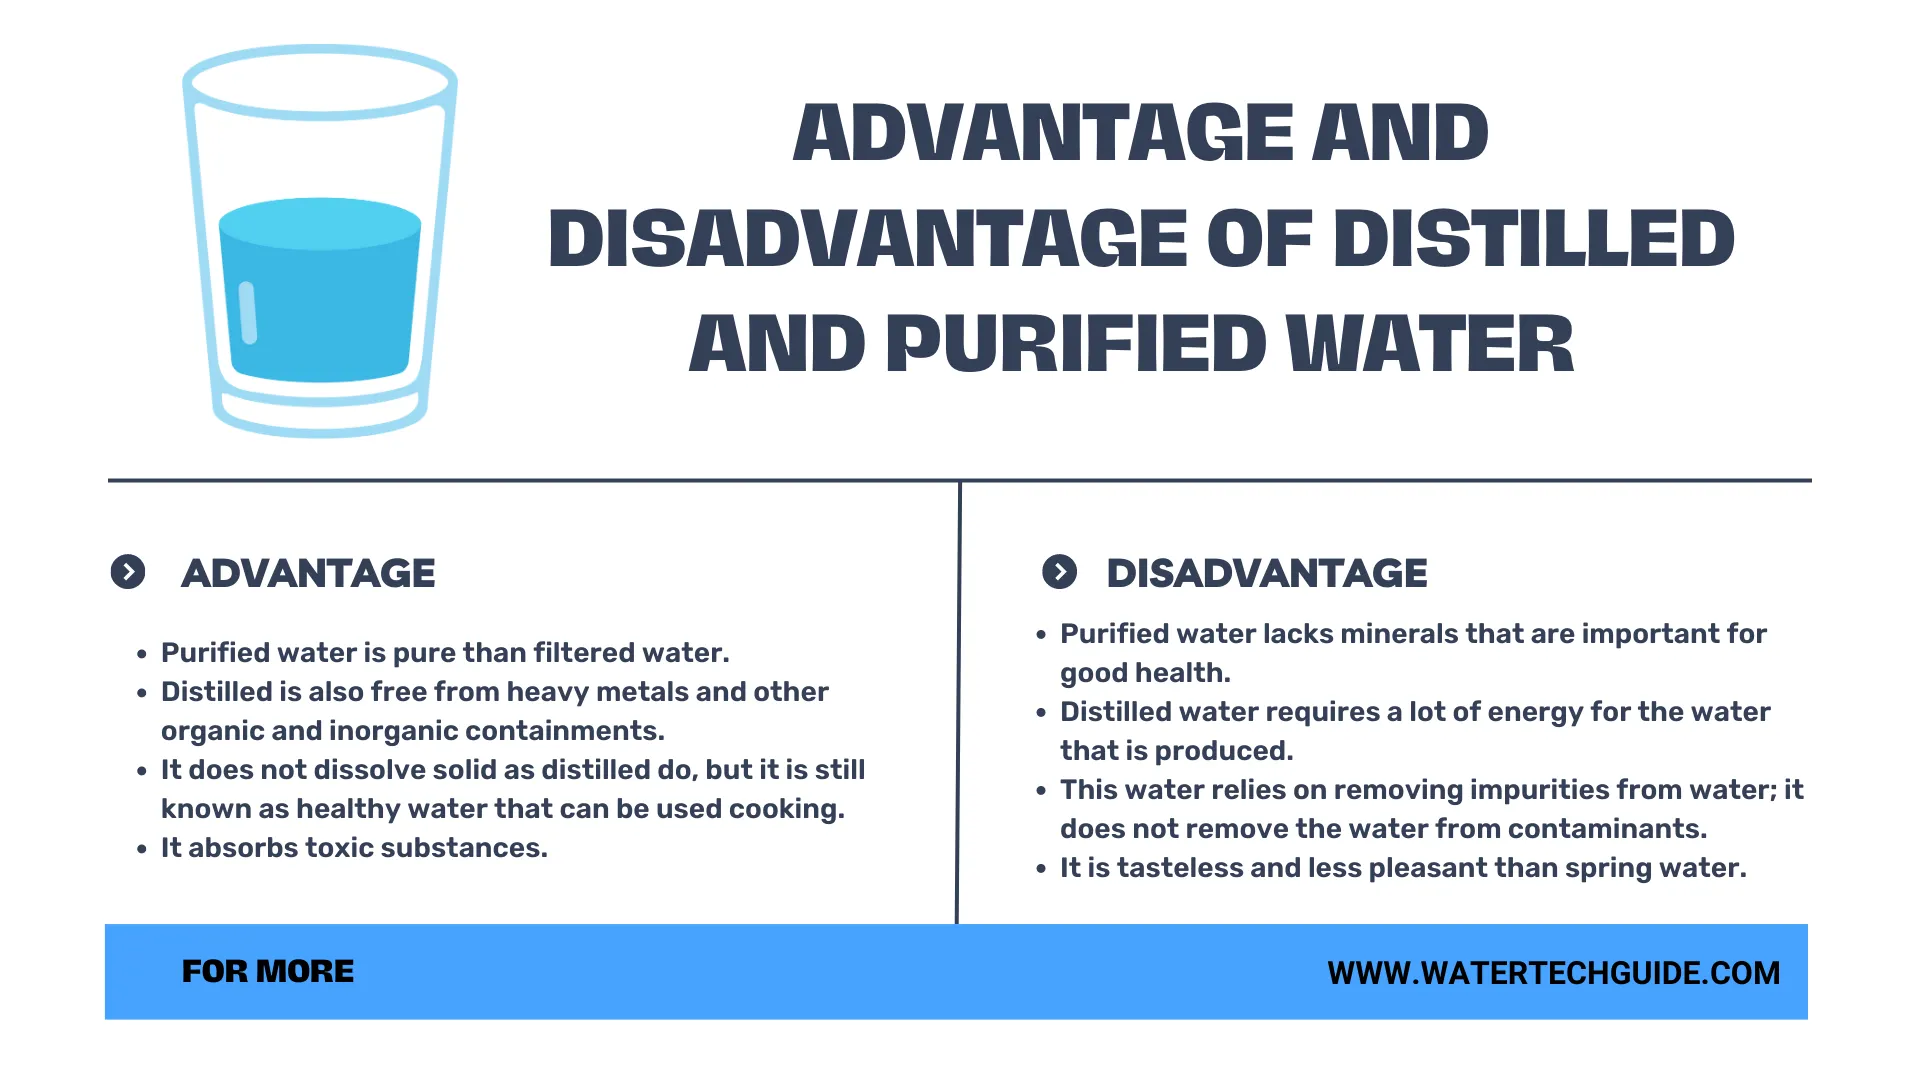 Advantage And Disadvantage of Distilled And Purified Water